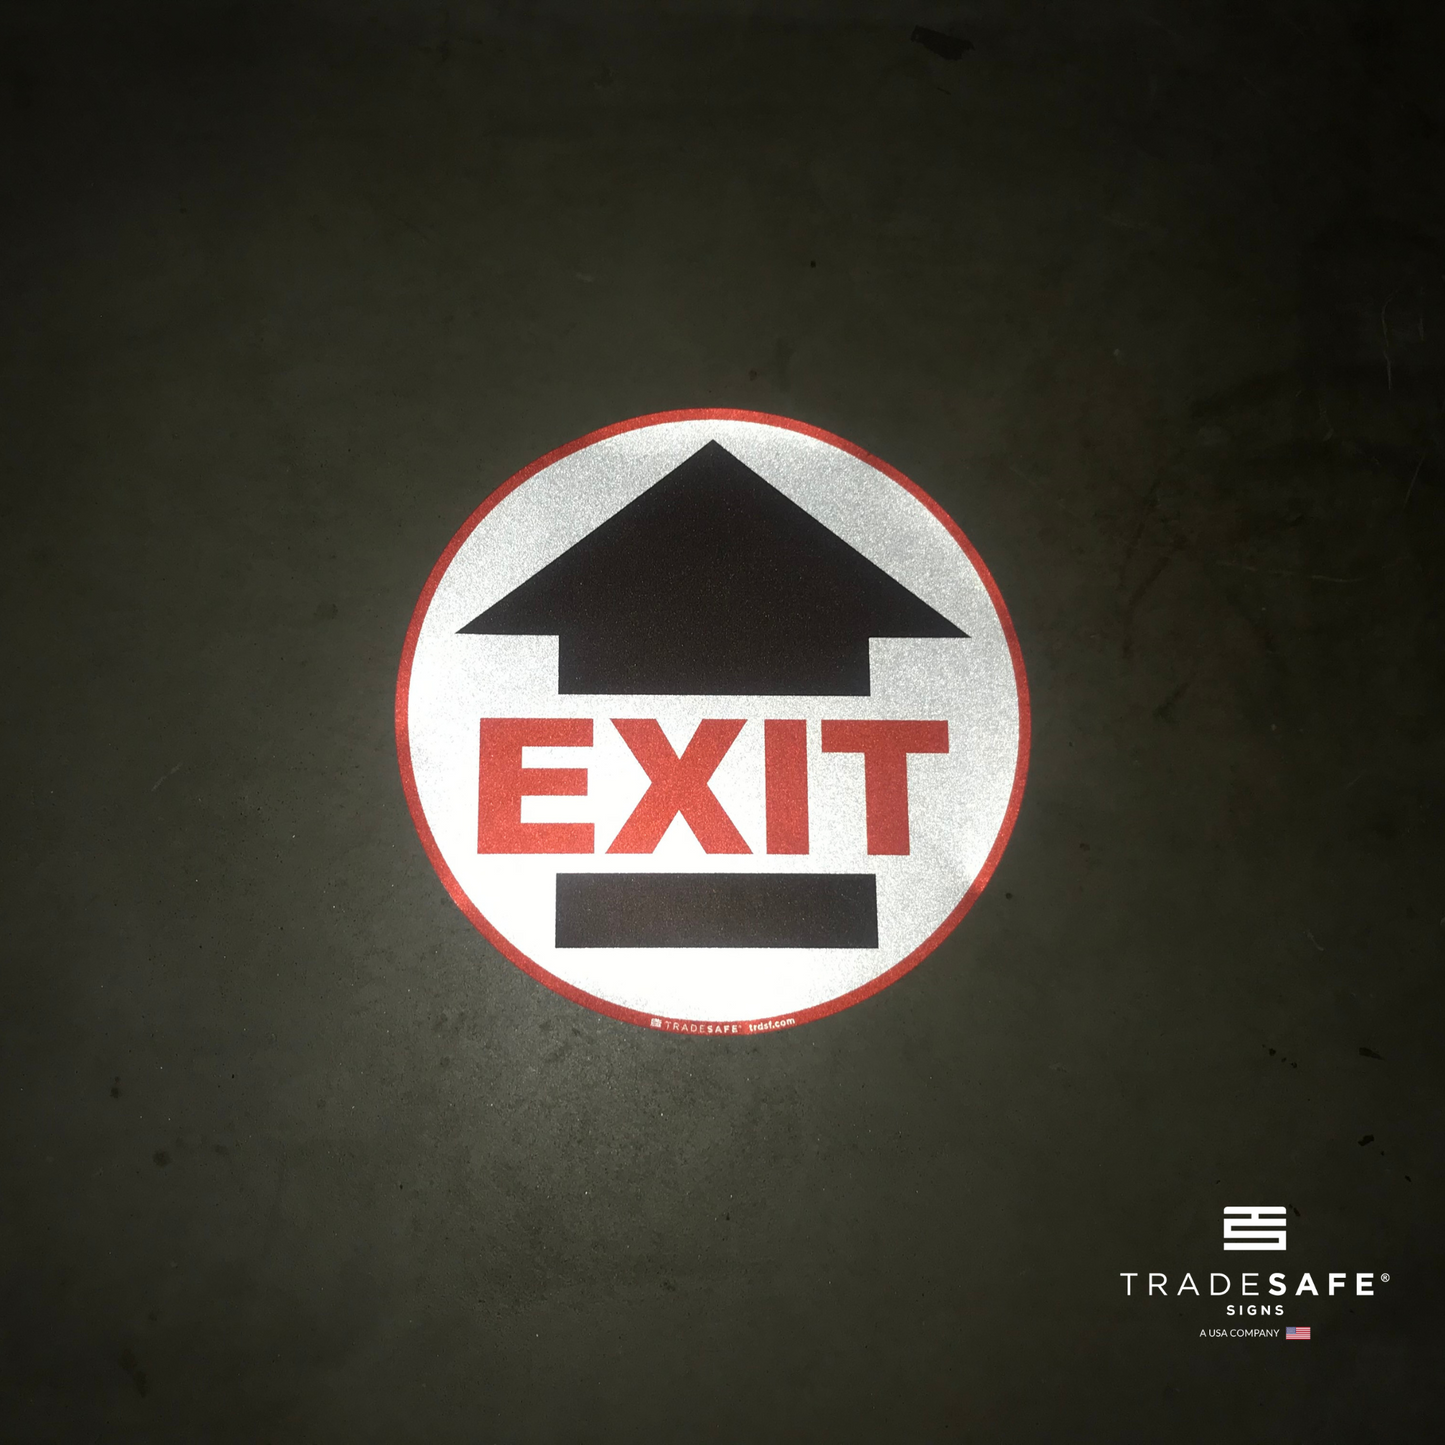 reflective attribute of exit sign on black background